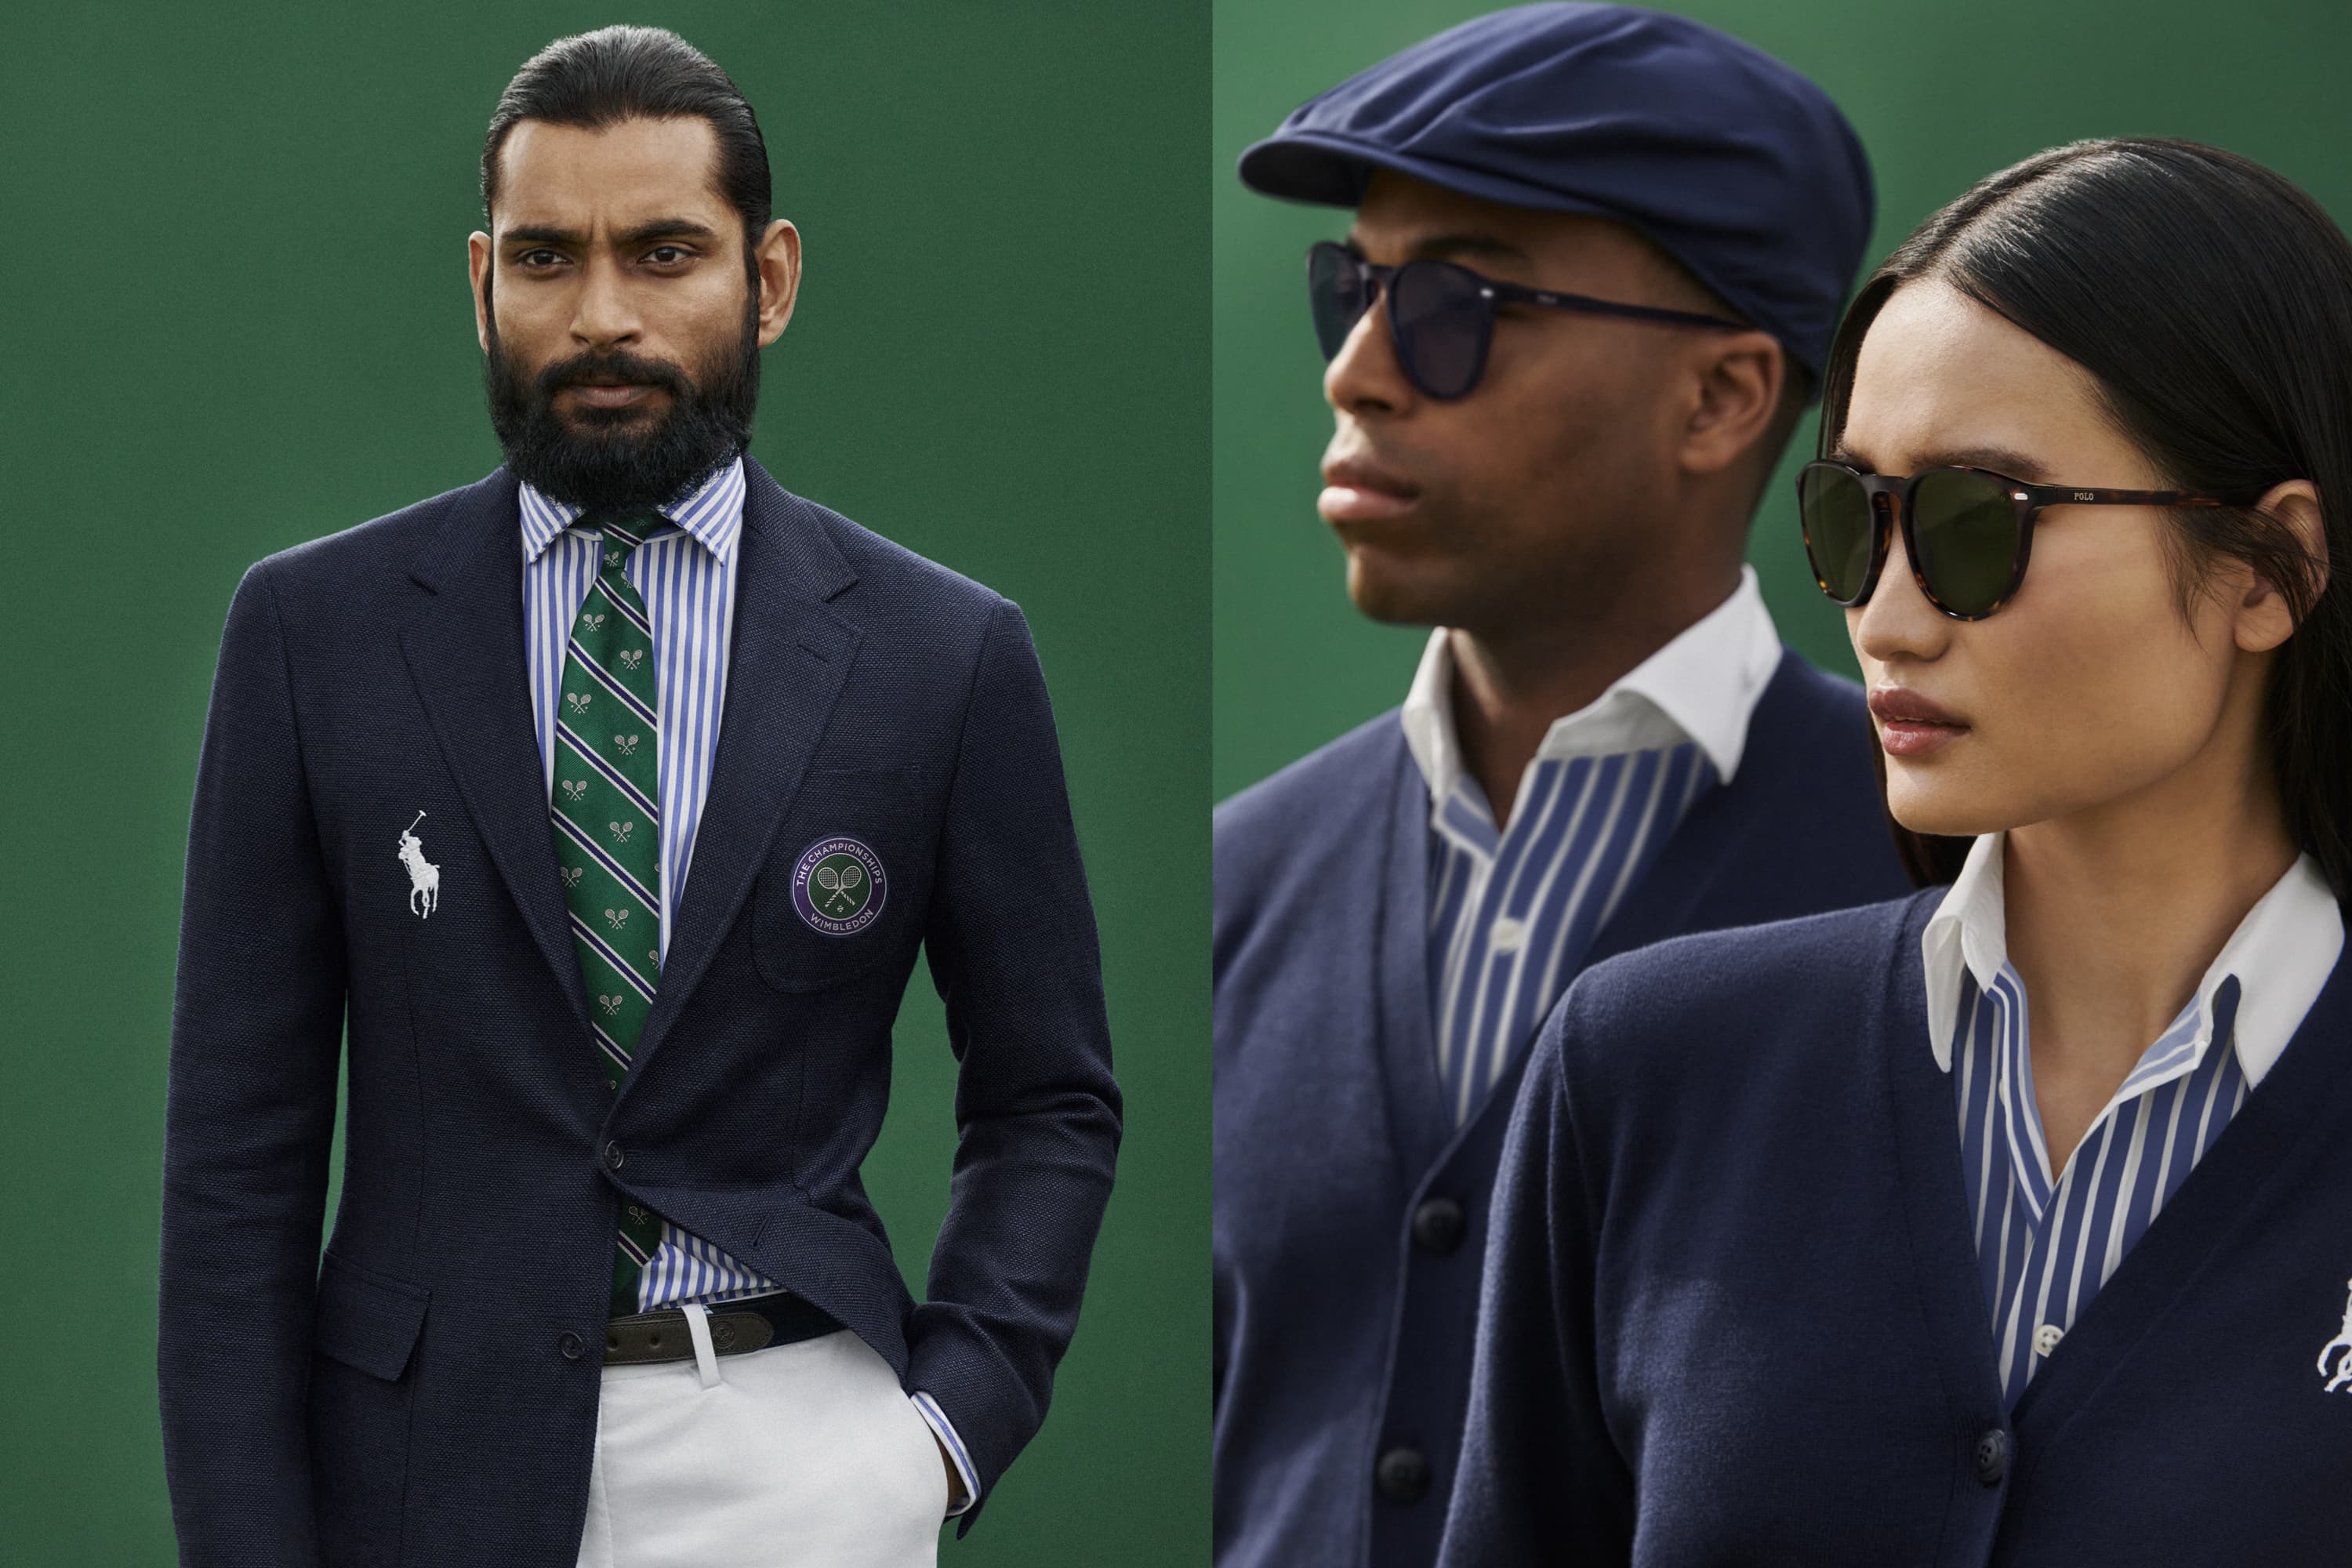 https://theimpression.com/wp-content/uploads/2023/07/Ralph-Lauren-Celebrates-The-Championships-Wimbledon-in-partnership-with-The-All-England-Lawn-Tennis-Club.001.jpeg